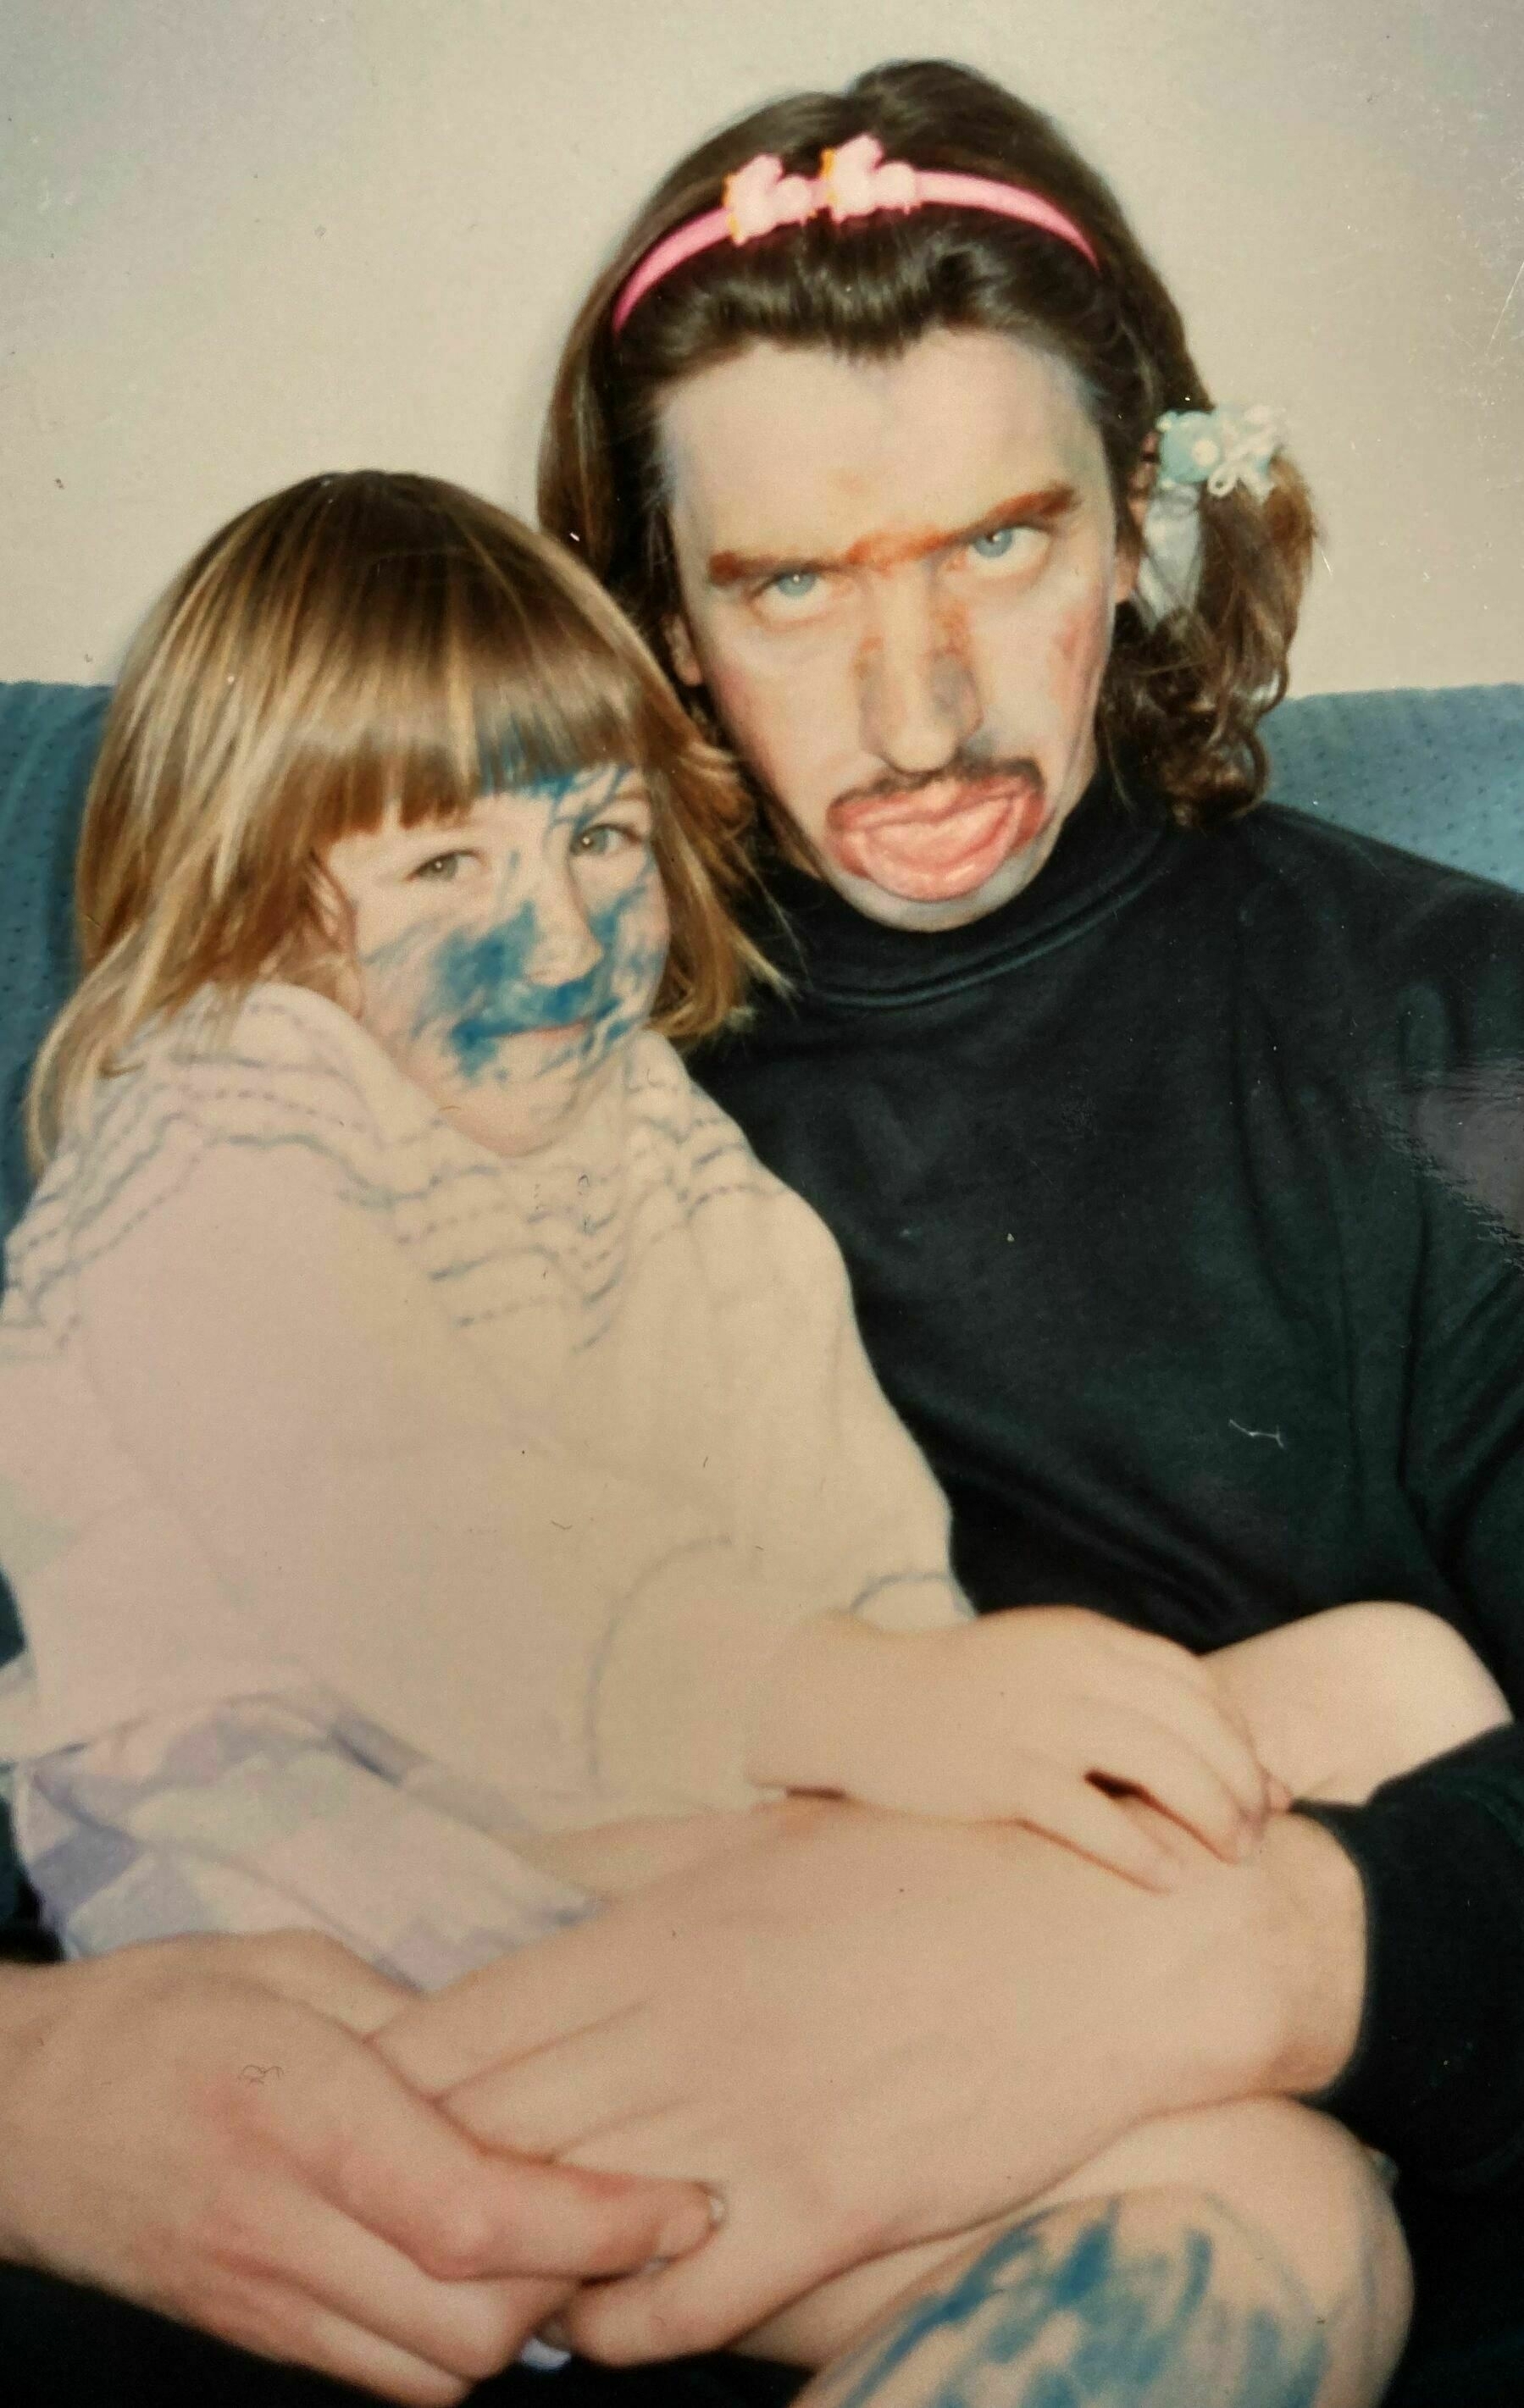 Man holding a child on his lap. The child has blue colouring on her face and leg the man has brown colouring on his face and an alice band in his hair.